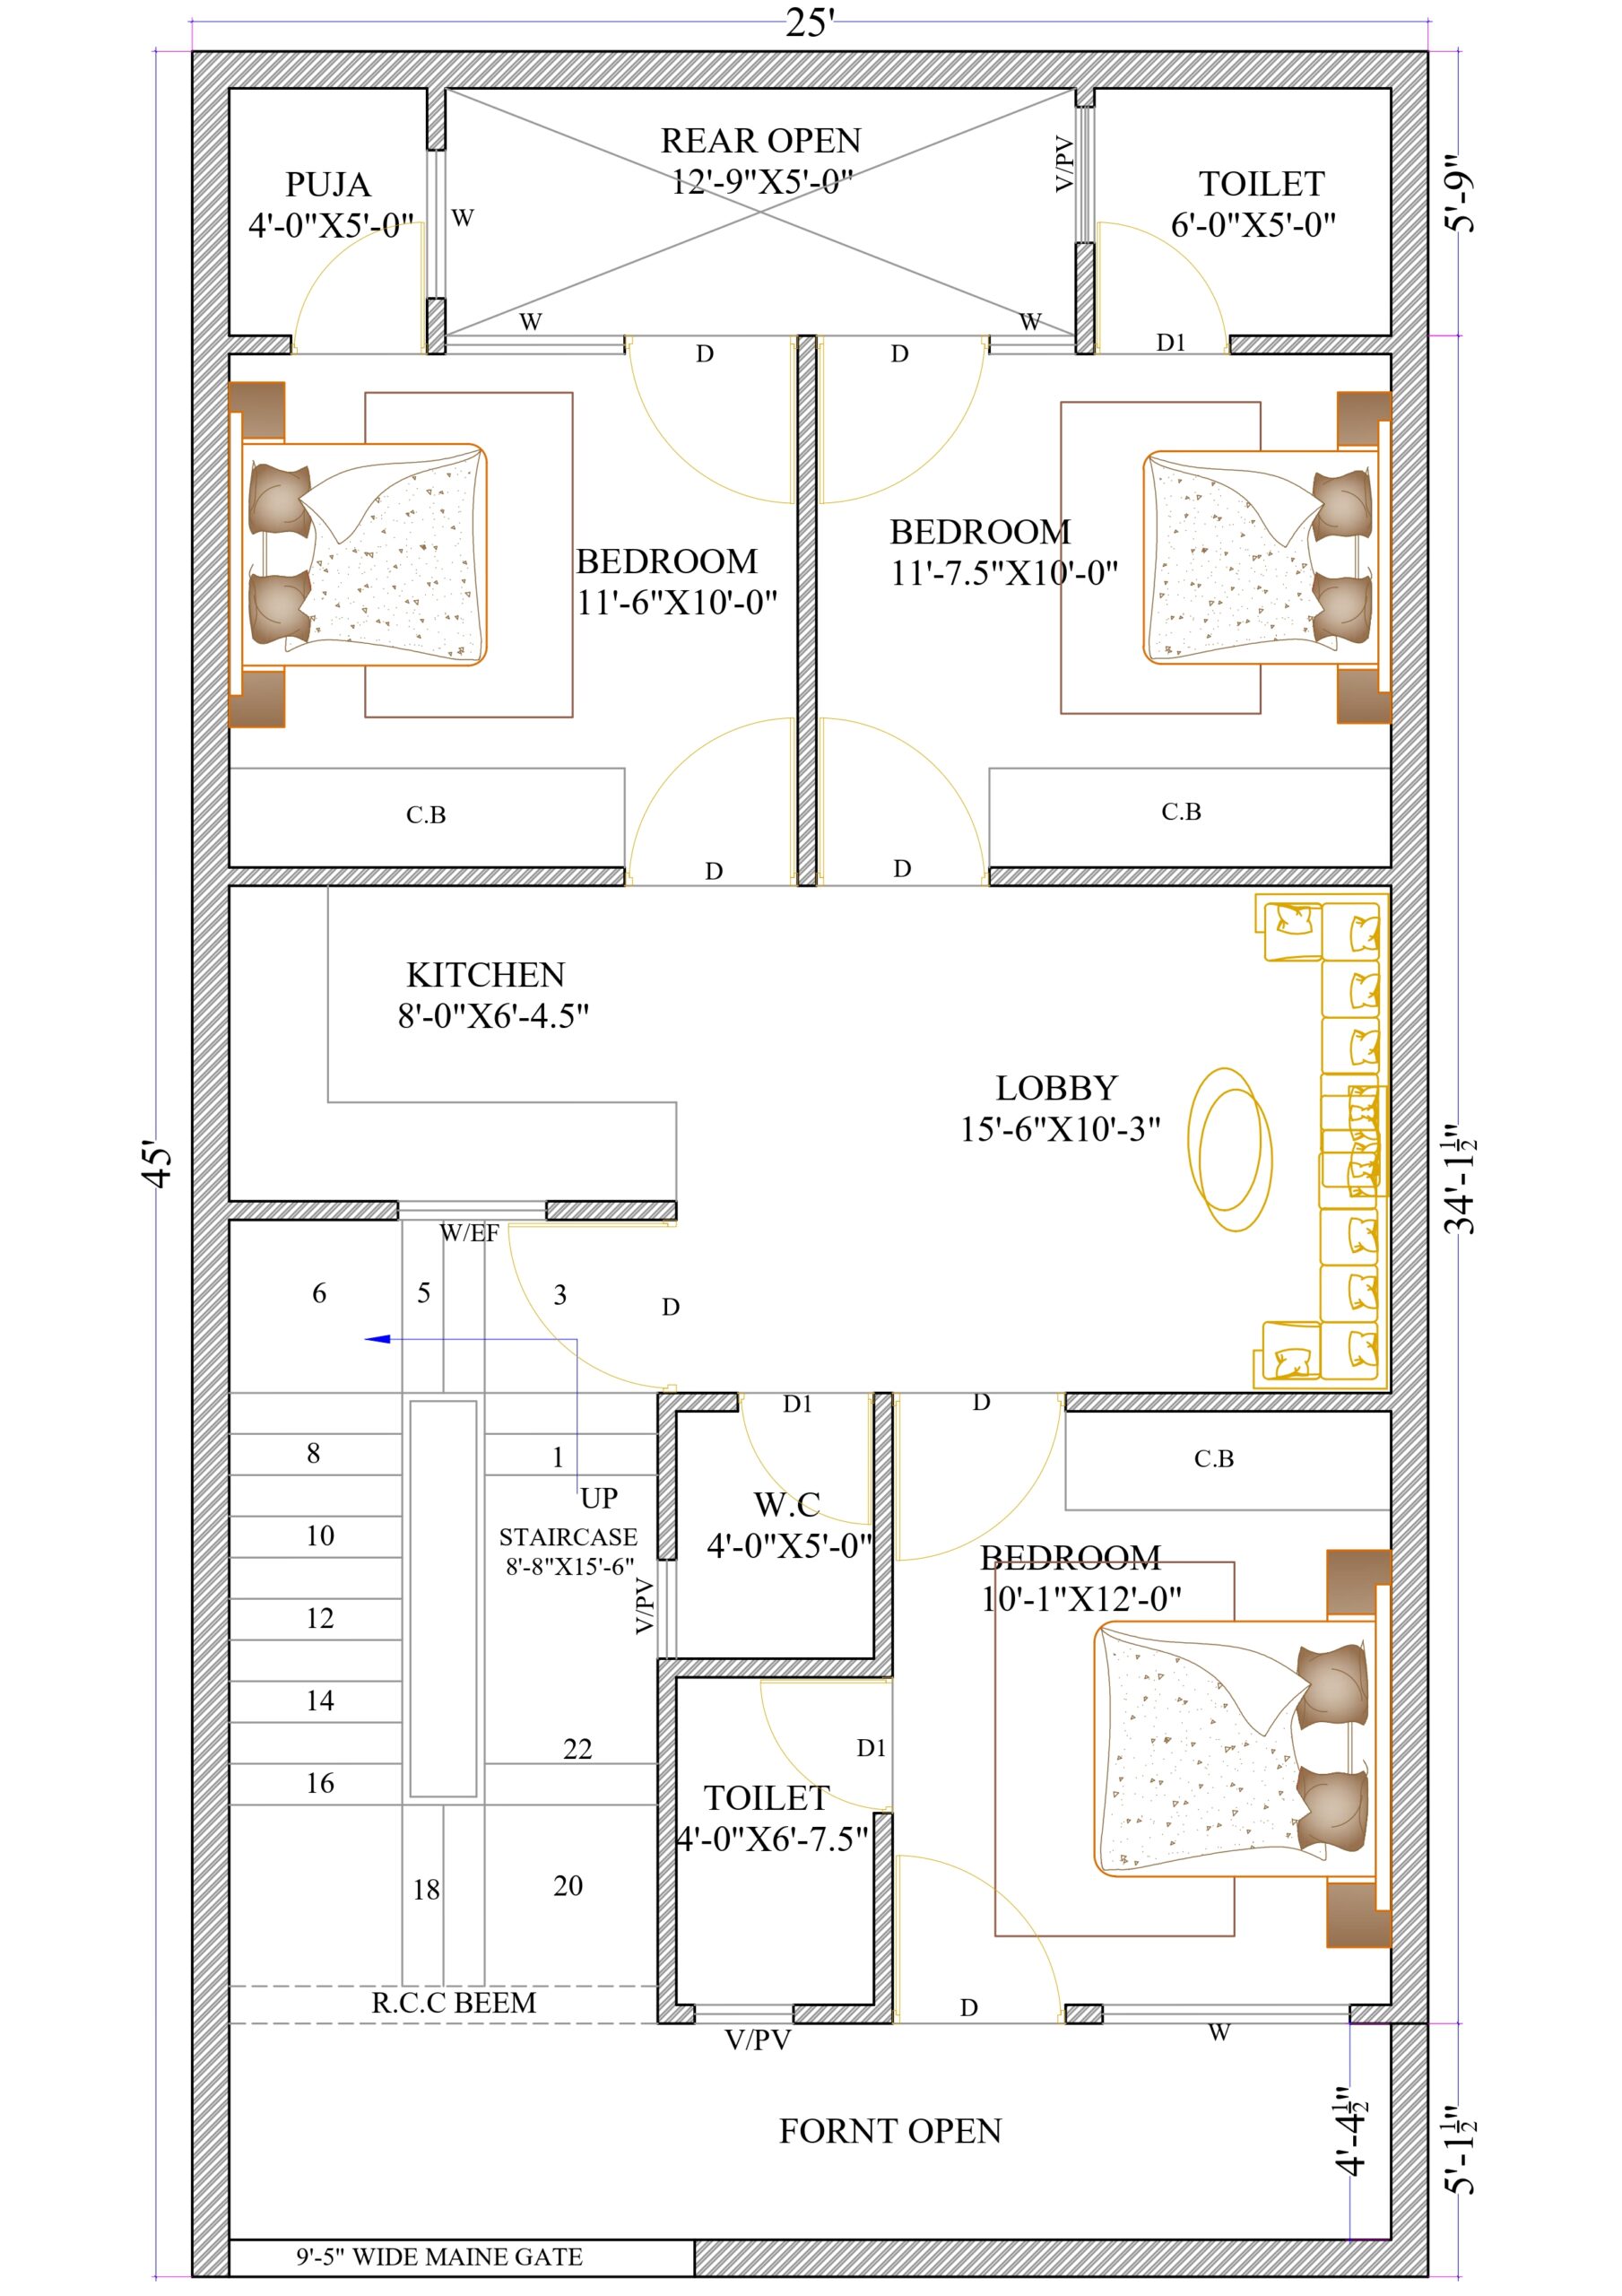 HOUSE PLAN OF SIZE 25 FEET BY 45 FEET (25X45) 125 SQUARE YARDS WEST FACING LAYOUT PLAN